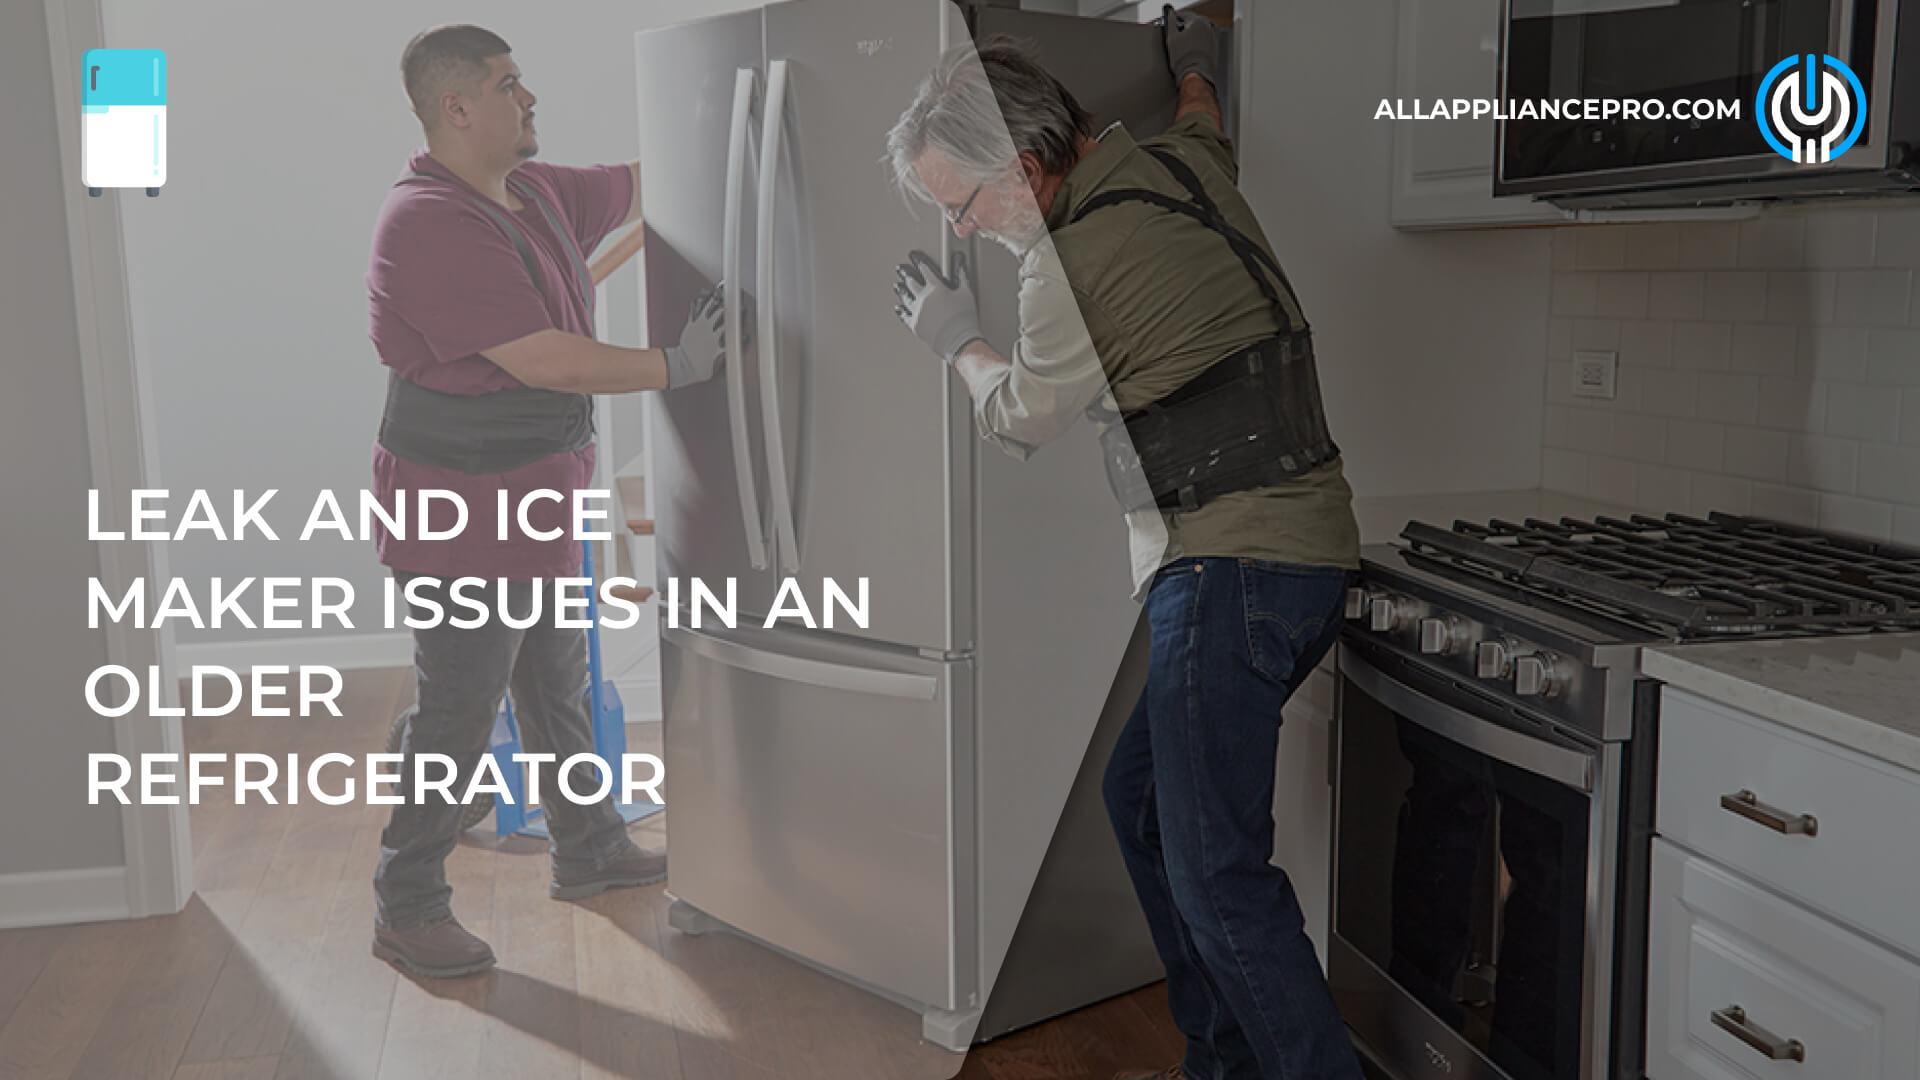 Leak and Ice Maker Issues in an Older Refrigerator